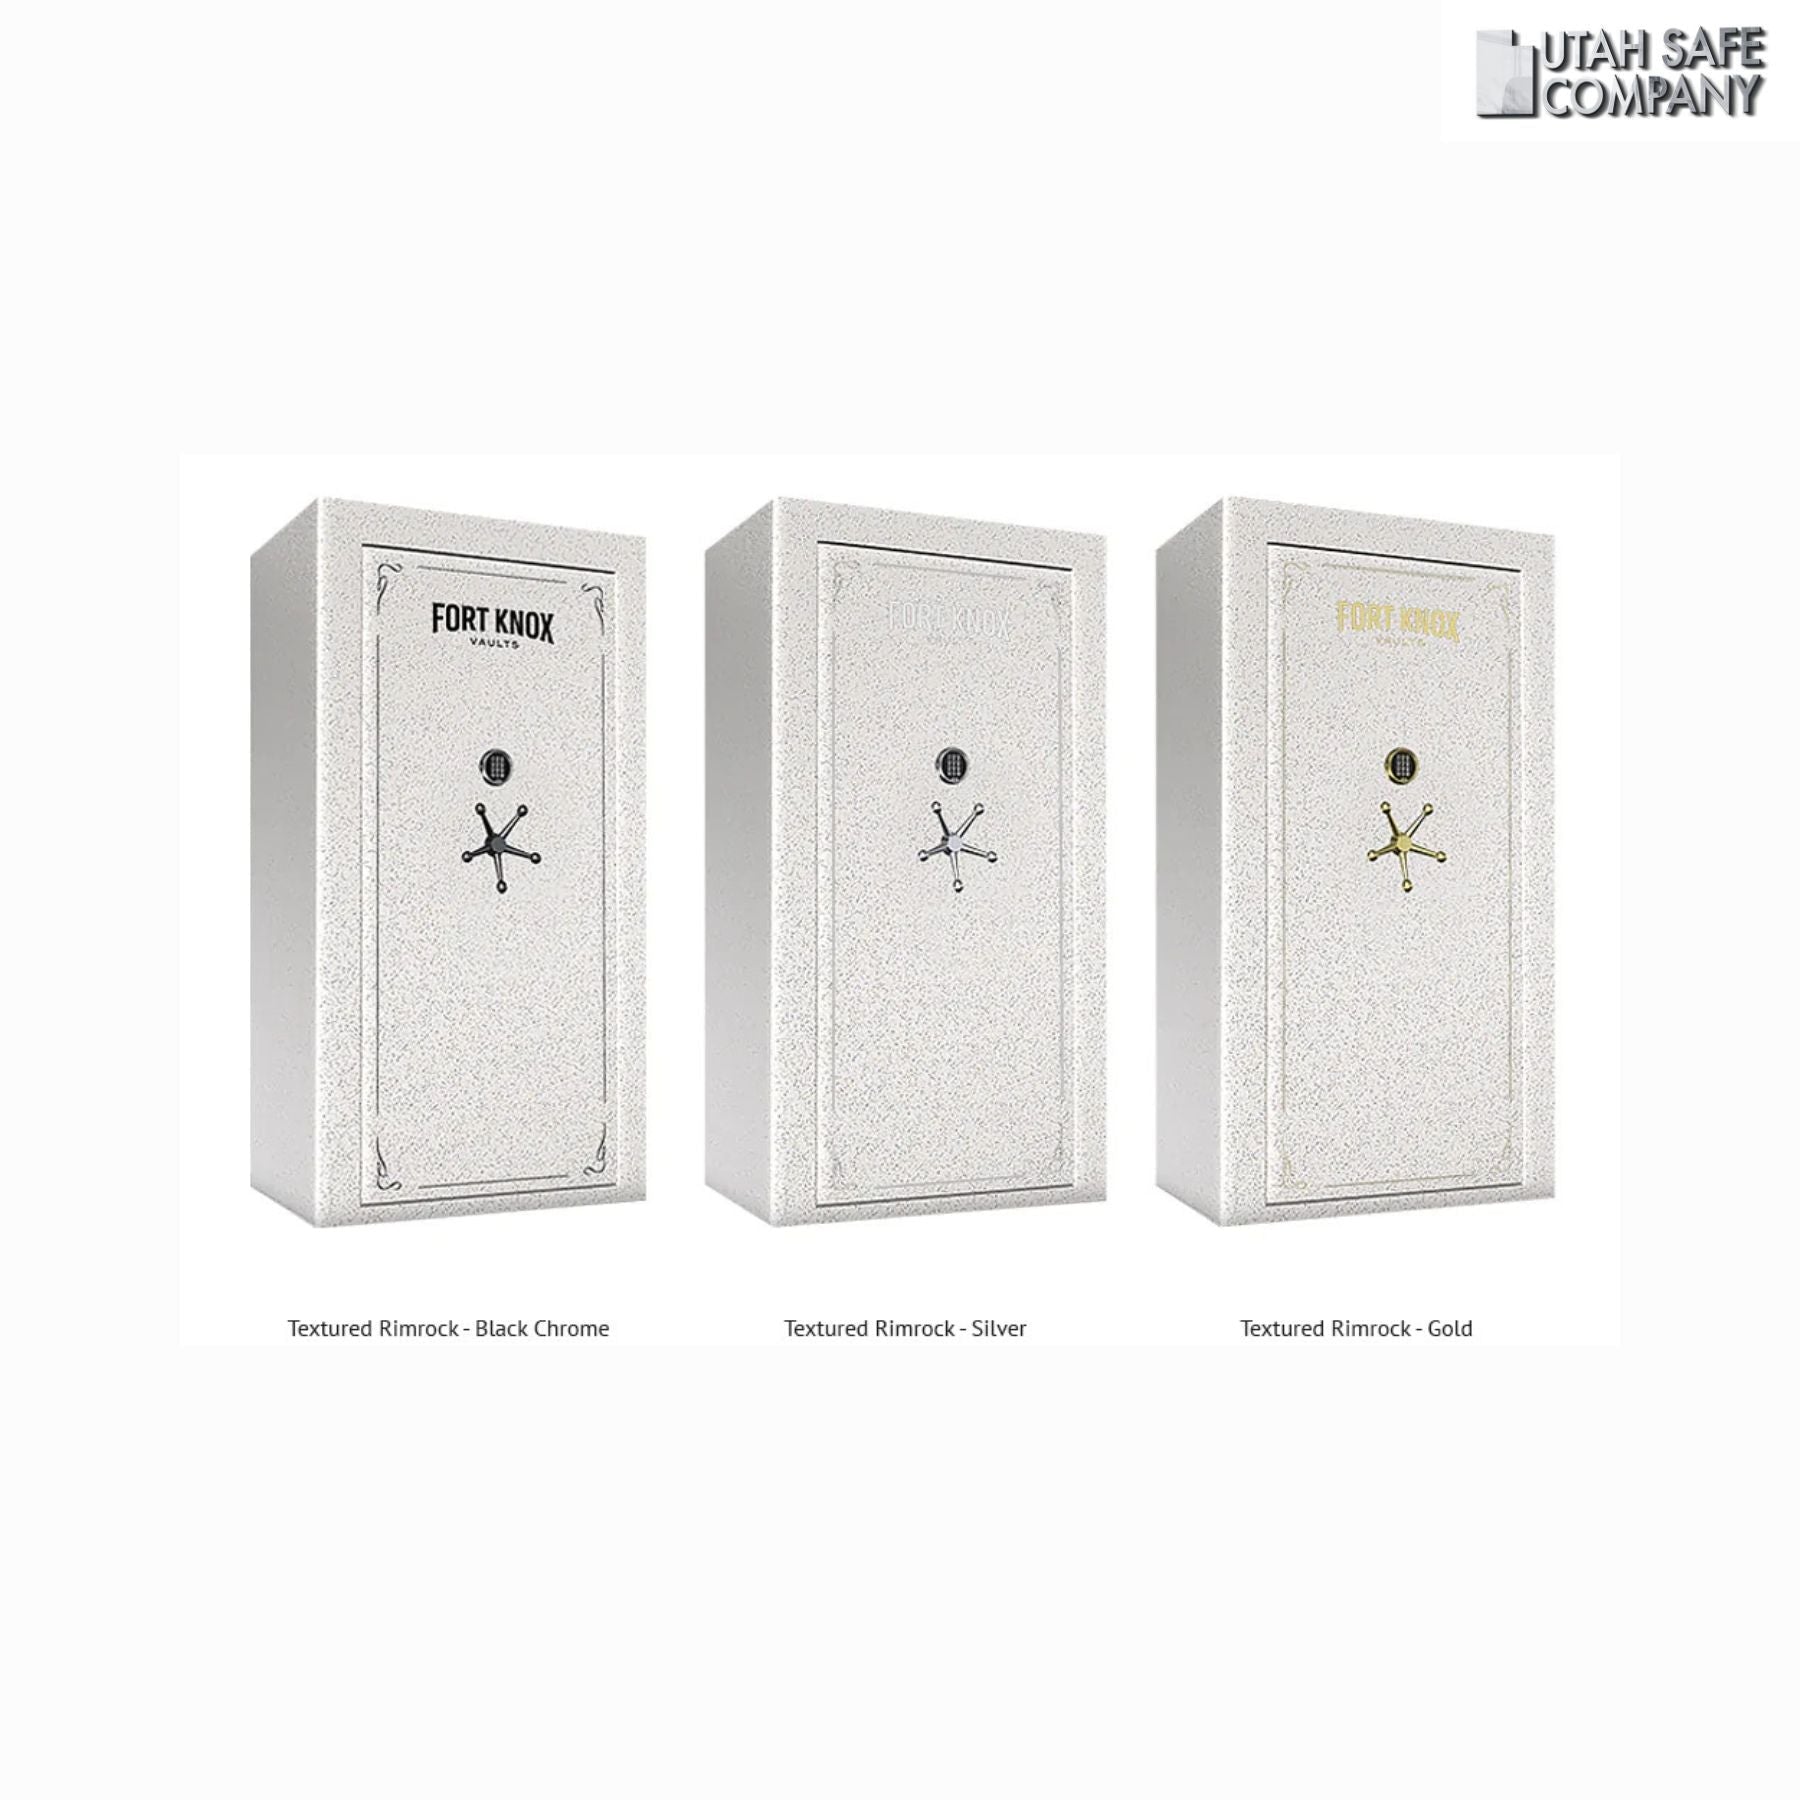 Fort Knox Protector 7241 Customizable Safe